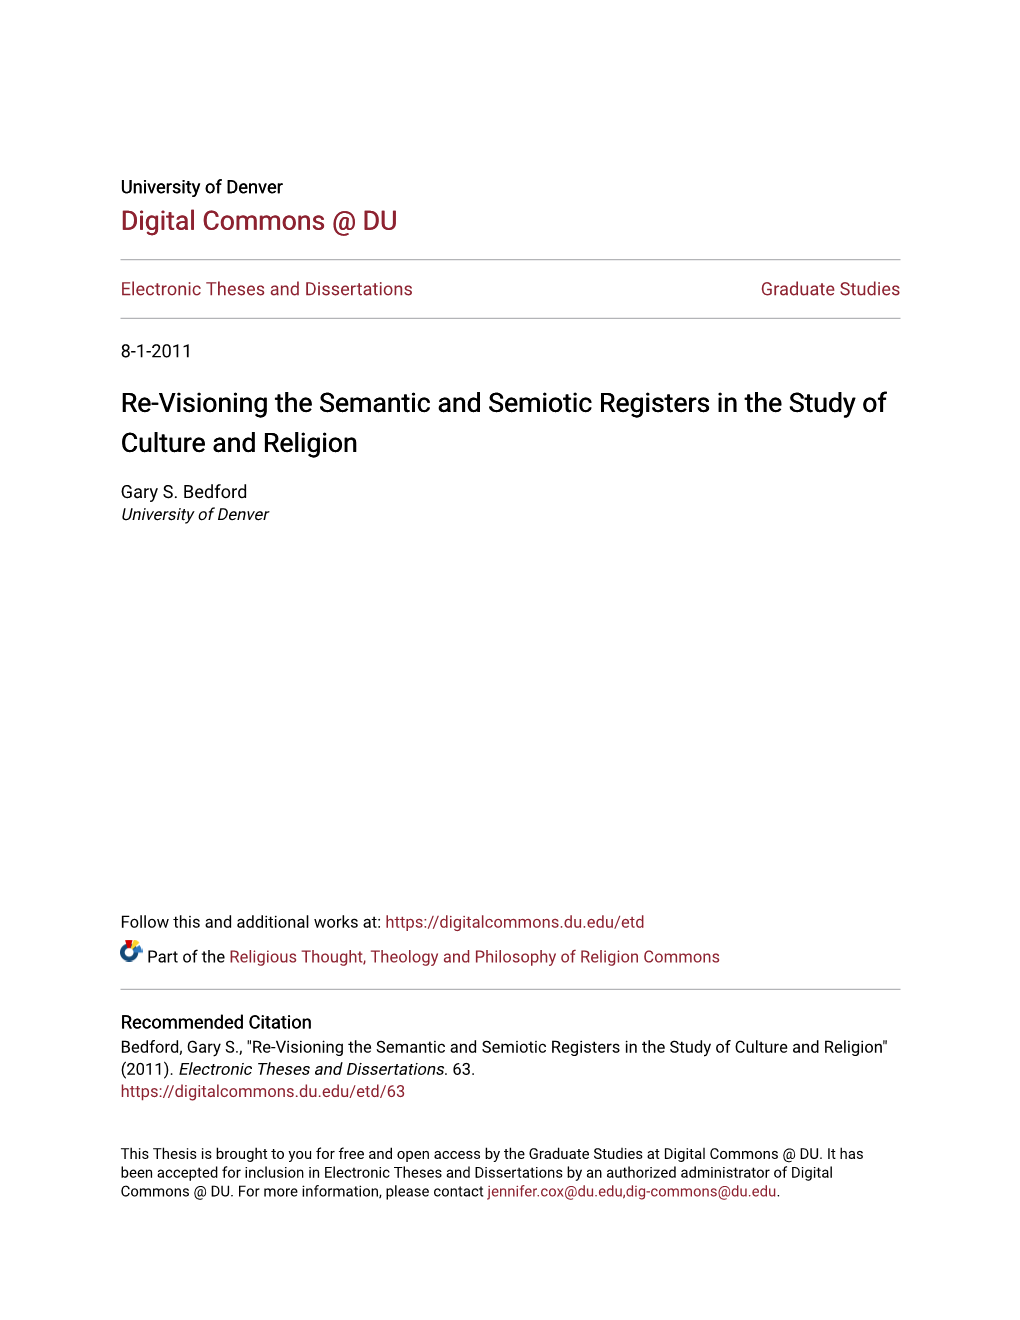 Re-Visioning the Semantic and Semiotic Registers in the Study of Culture and Religion